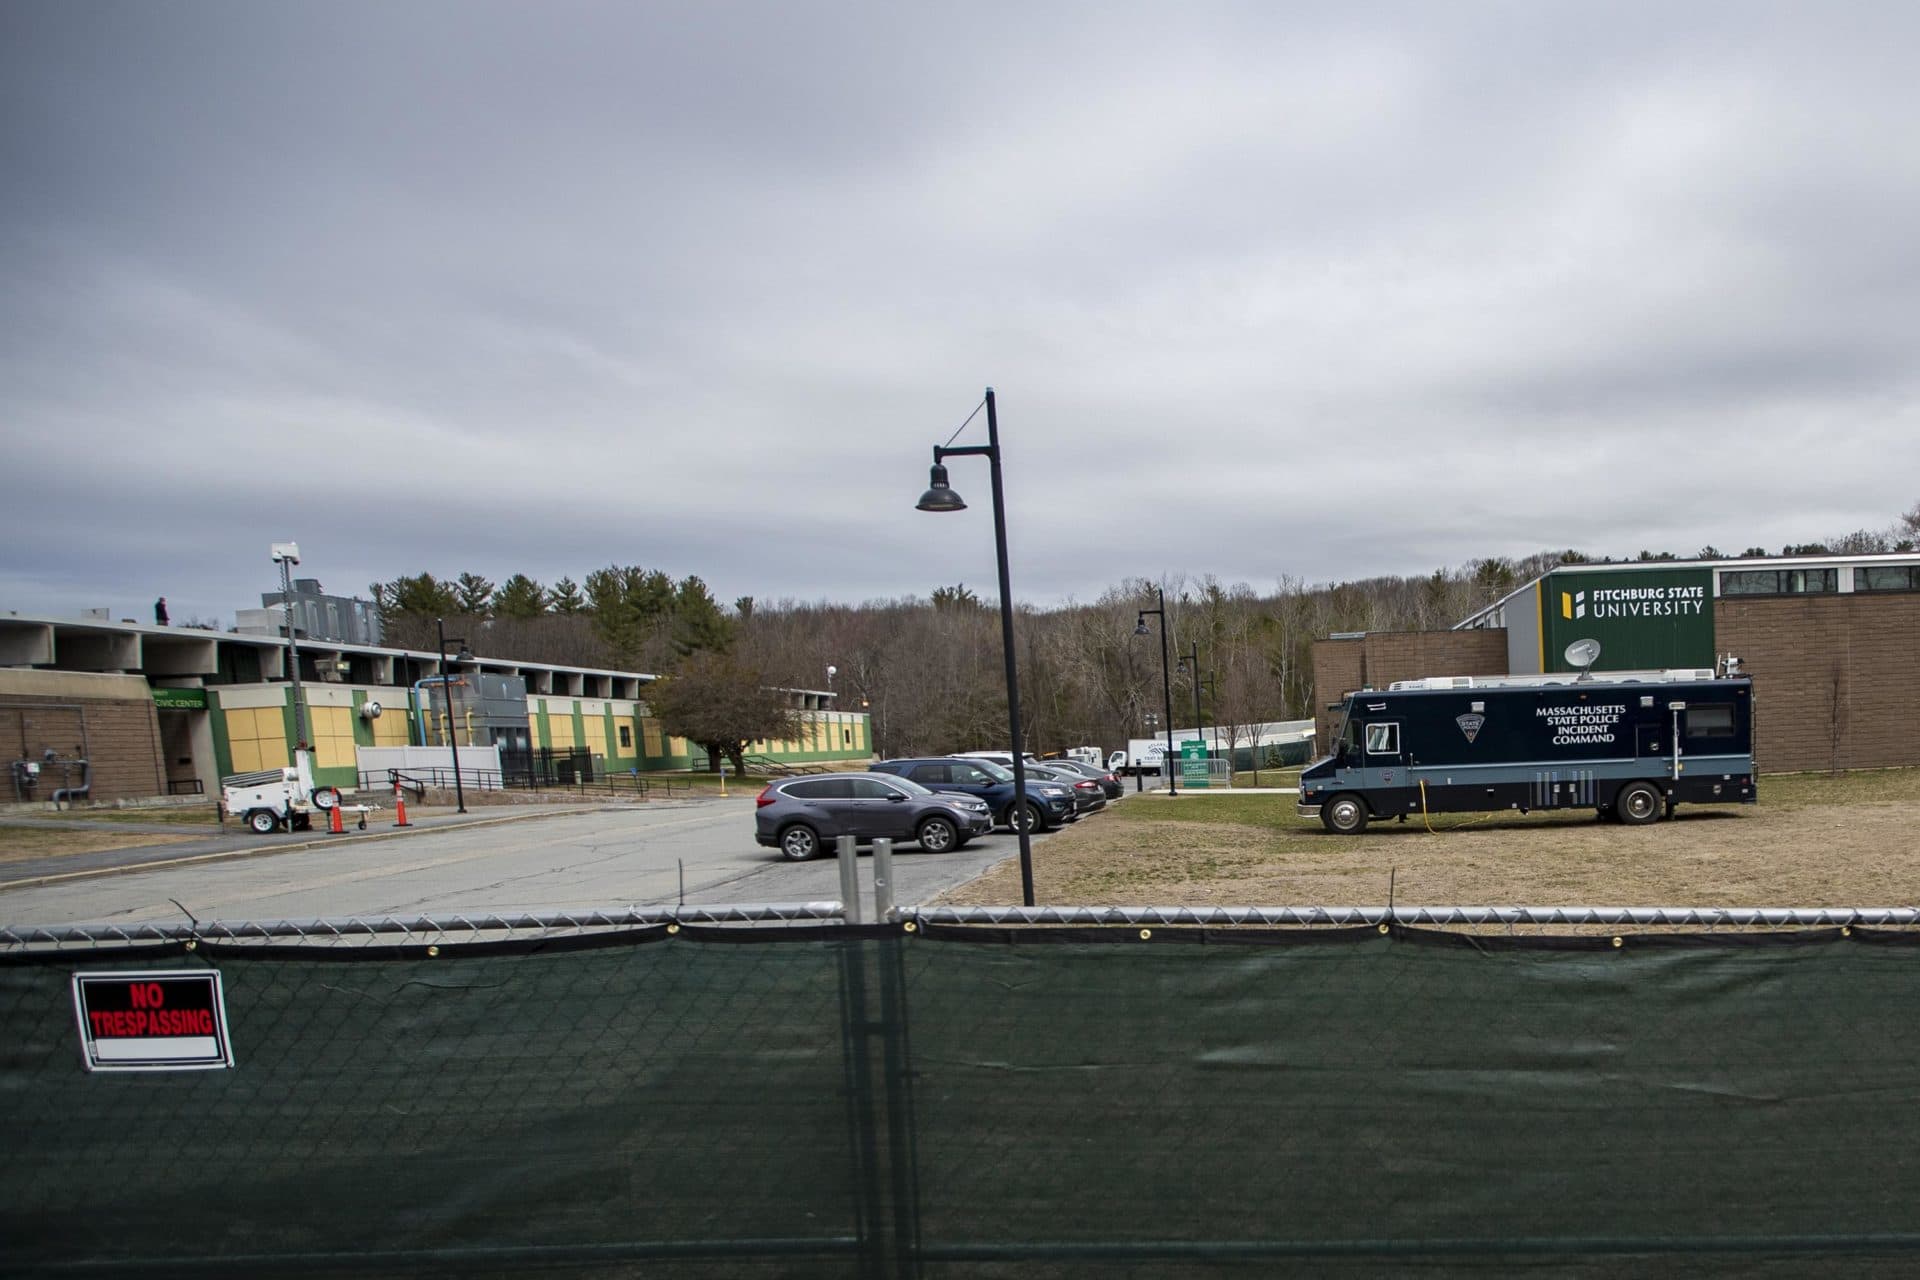 April 2: A temporary morgue staged at Fitchburg State University's Landry Arena. (Jesse Costa/WBUR)